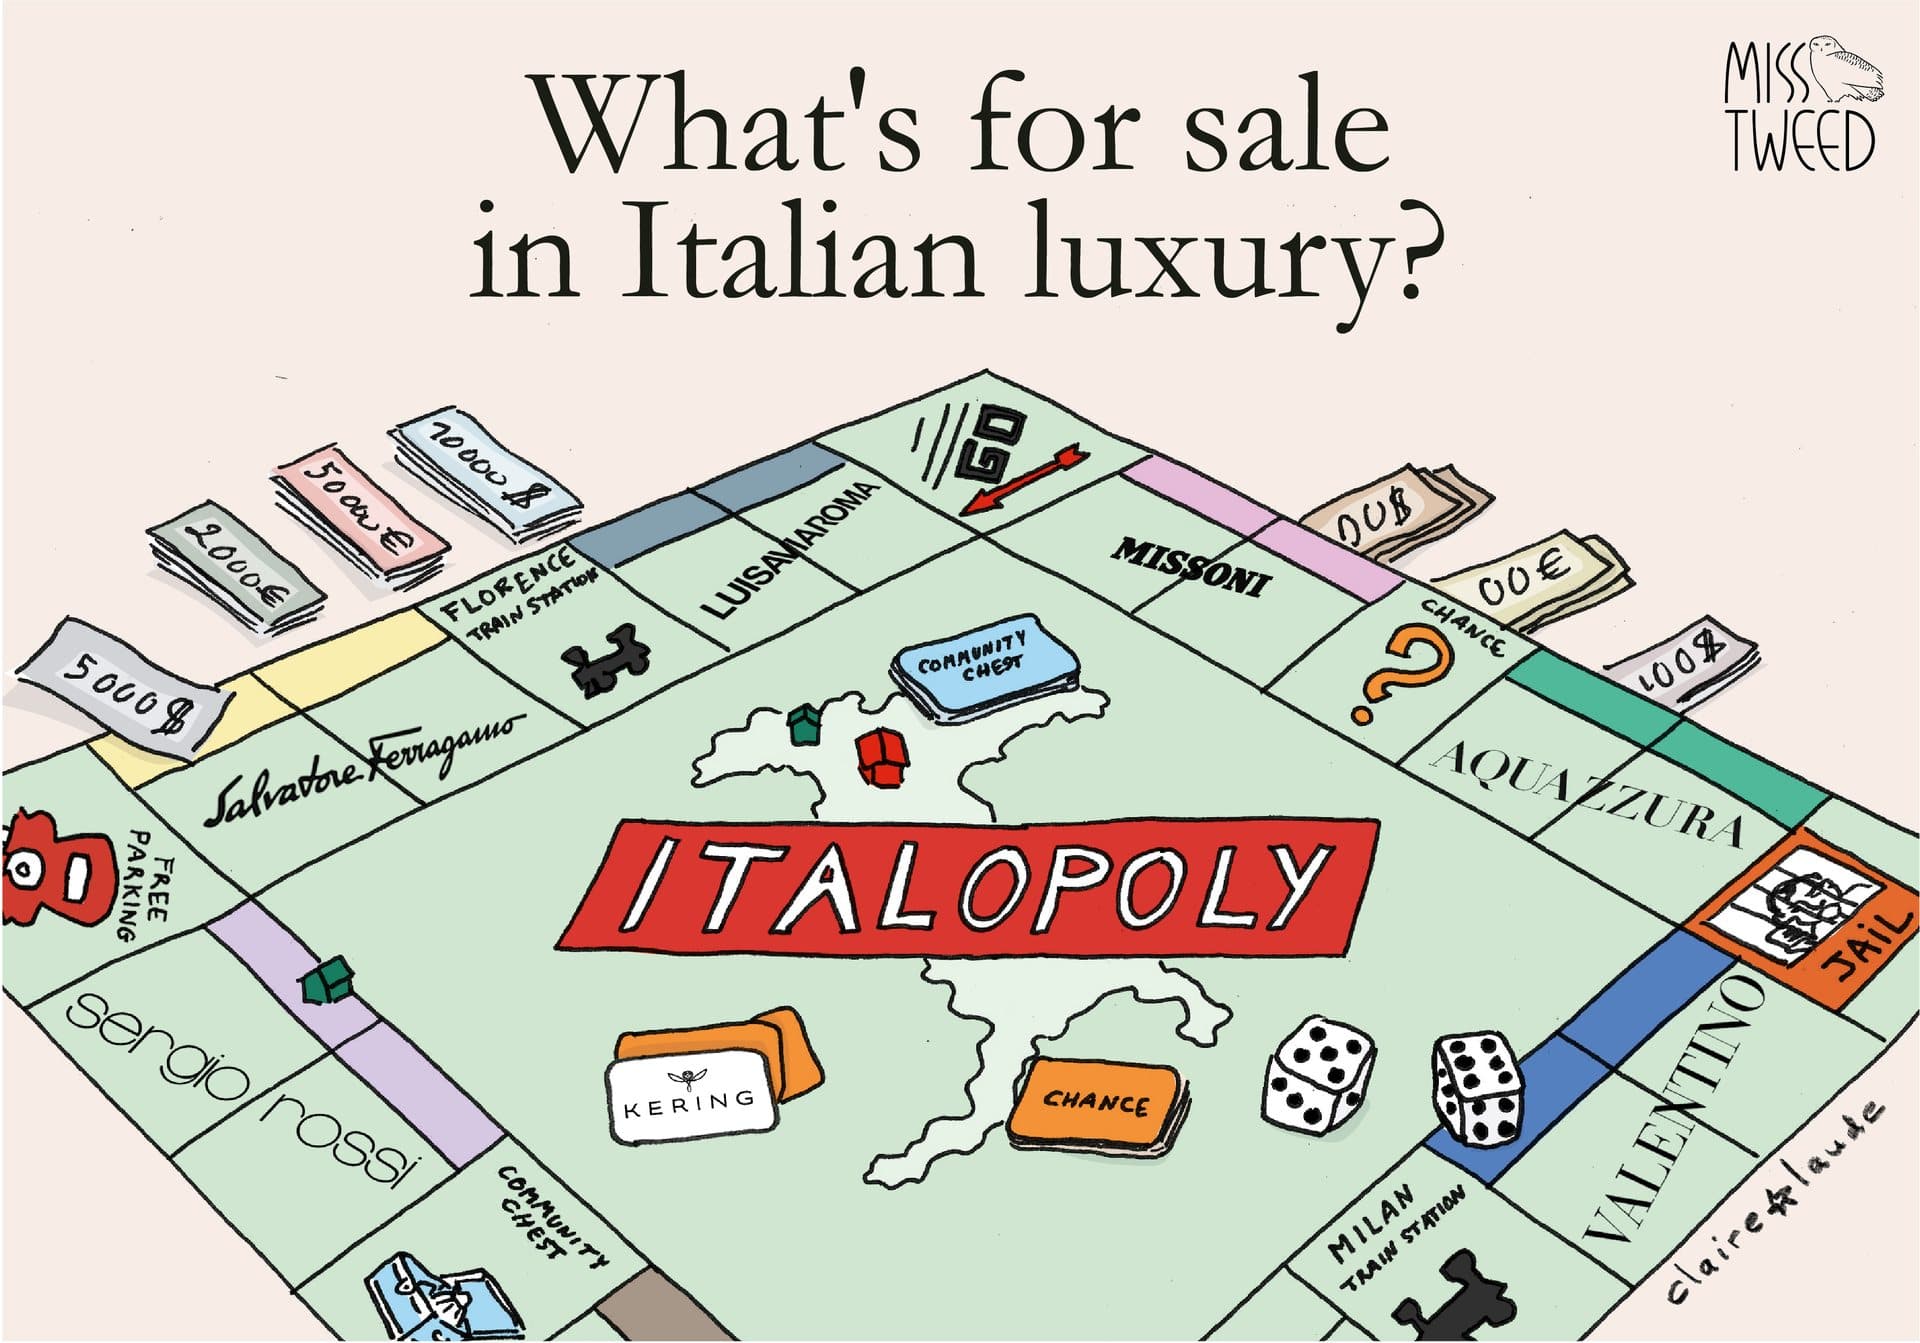 ITALY’S SPRING SALE:
As M&A heats up, Italian luxury and fashion assets are under the spotlight